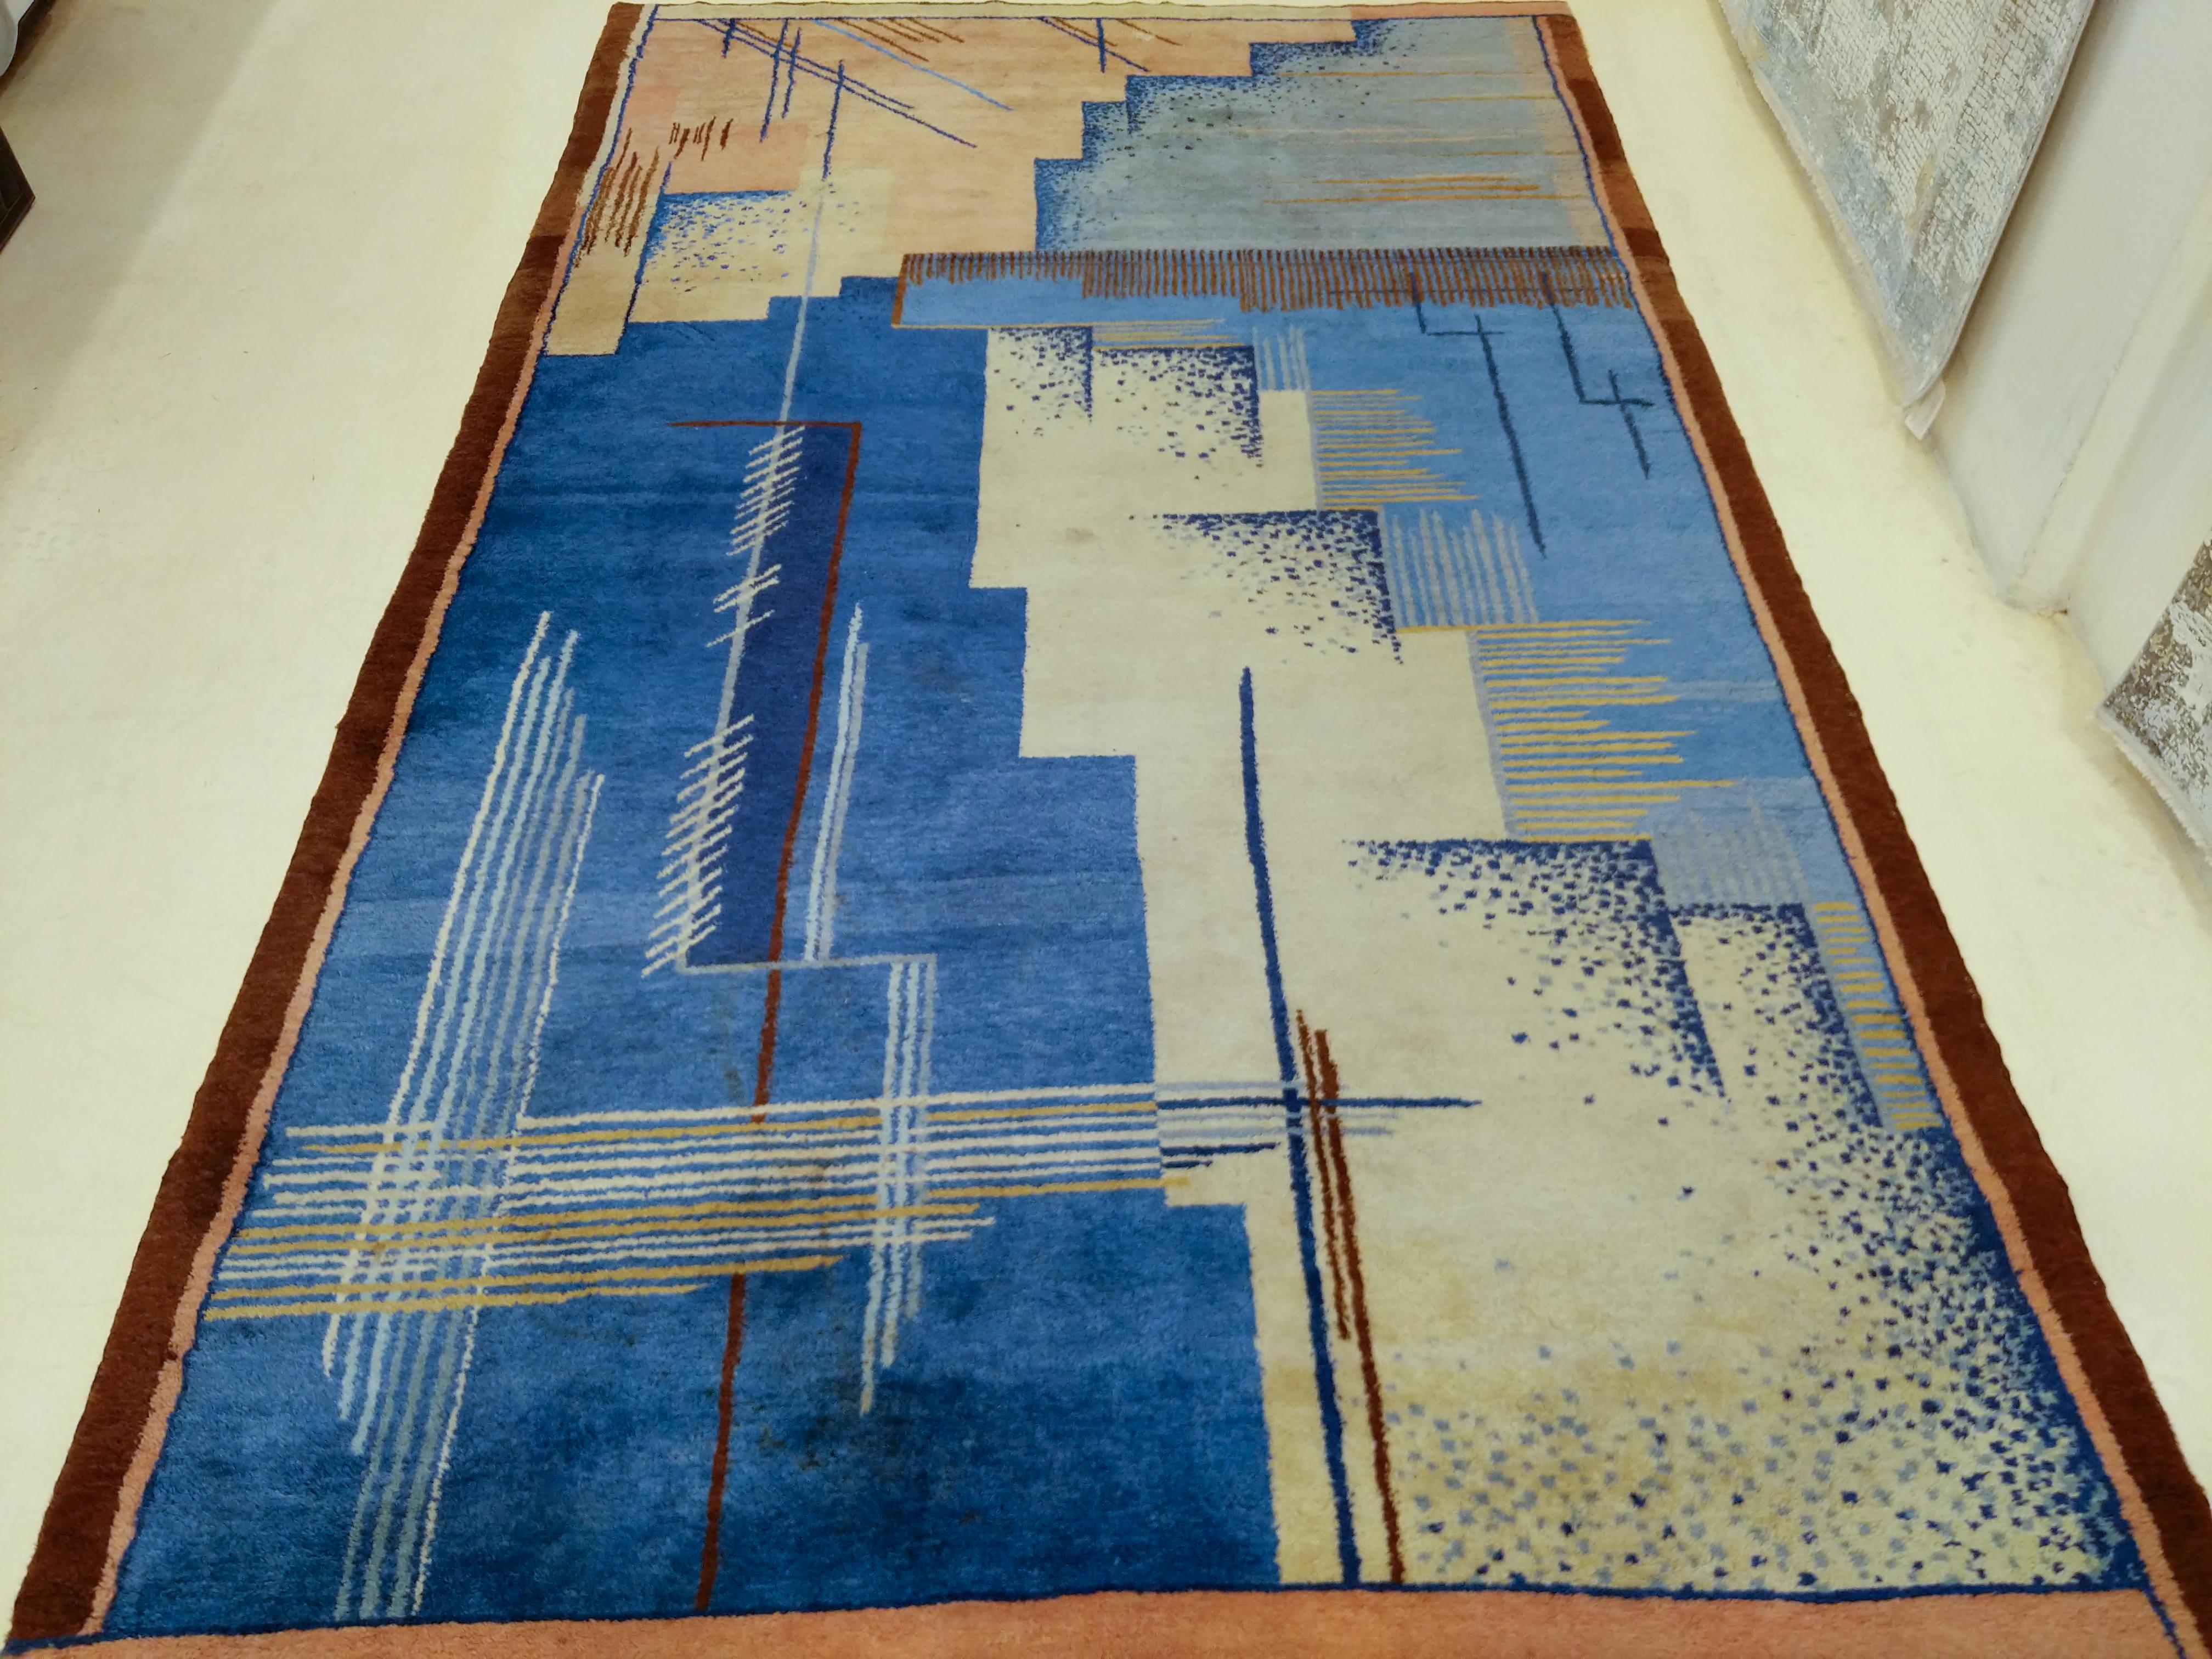 An extremely rare Art Deco rug designed in 1925 by Jean Burkhalter and commissioned by Pierre Chareau for a seaside mansion on the island of Corsica. This example, which is in mint condition, is part of a suite of five pieces, each crafted fit into